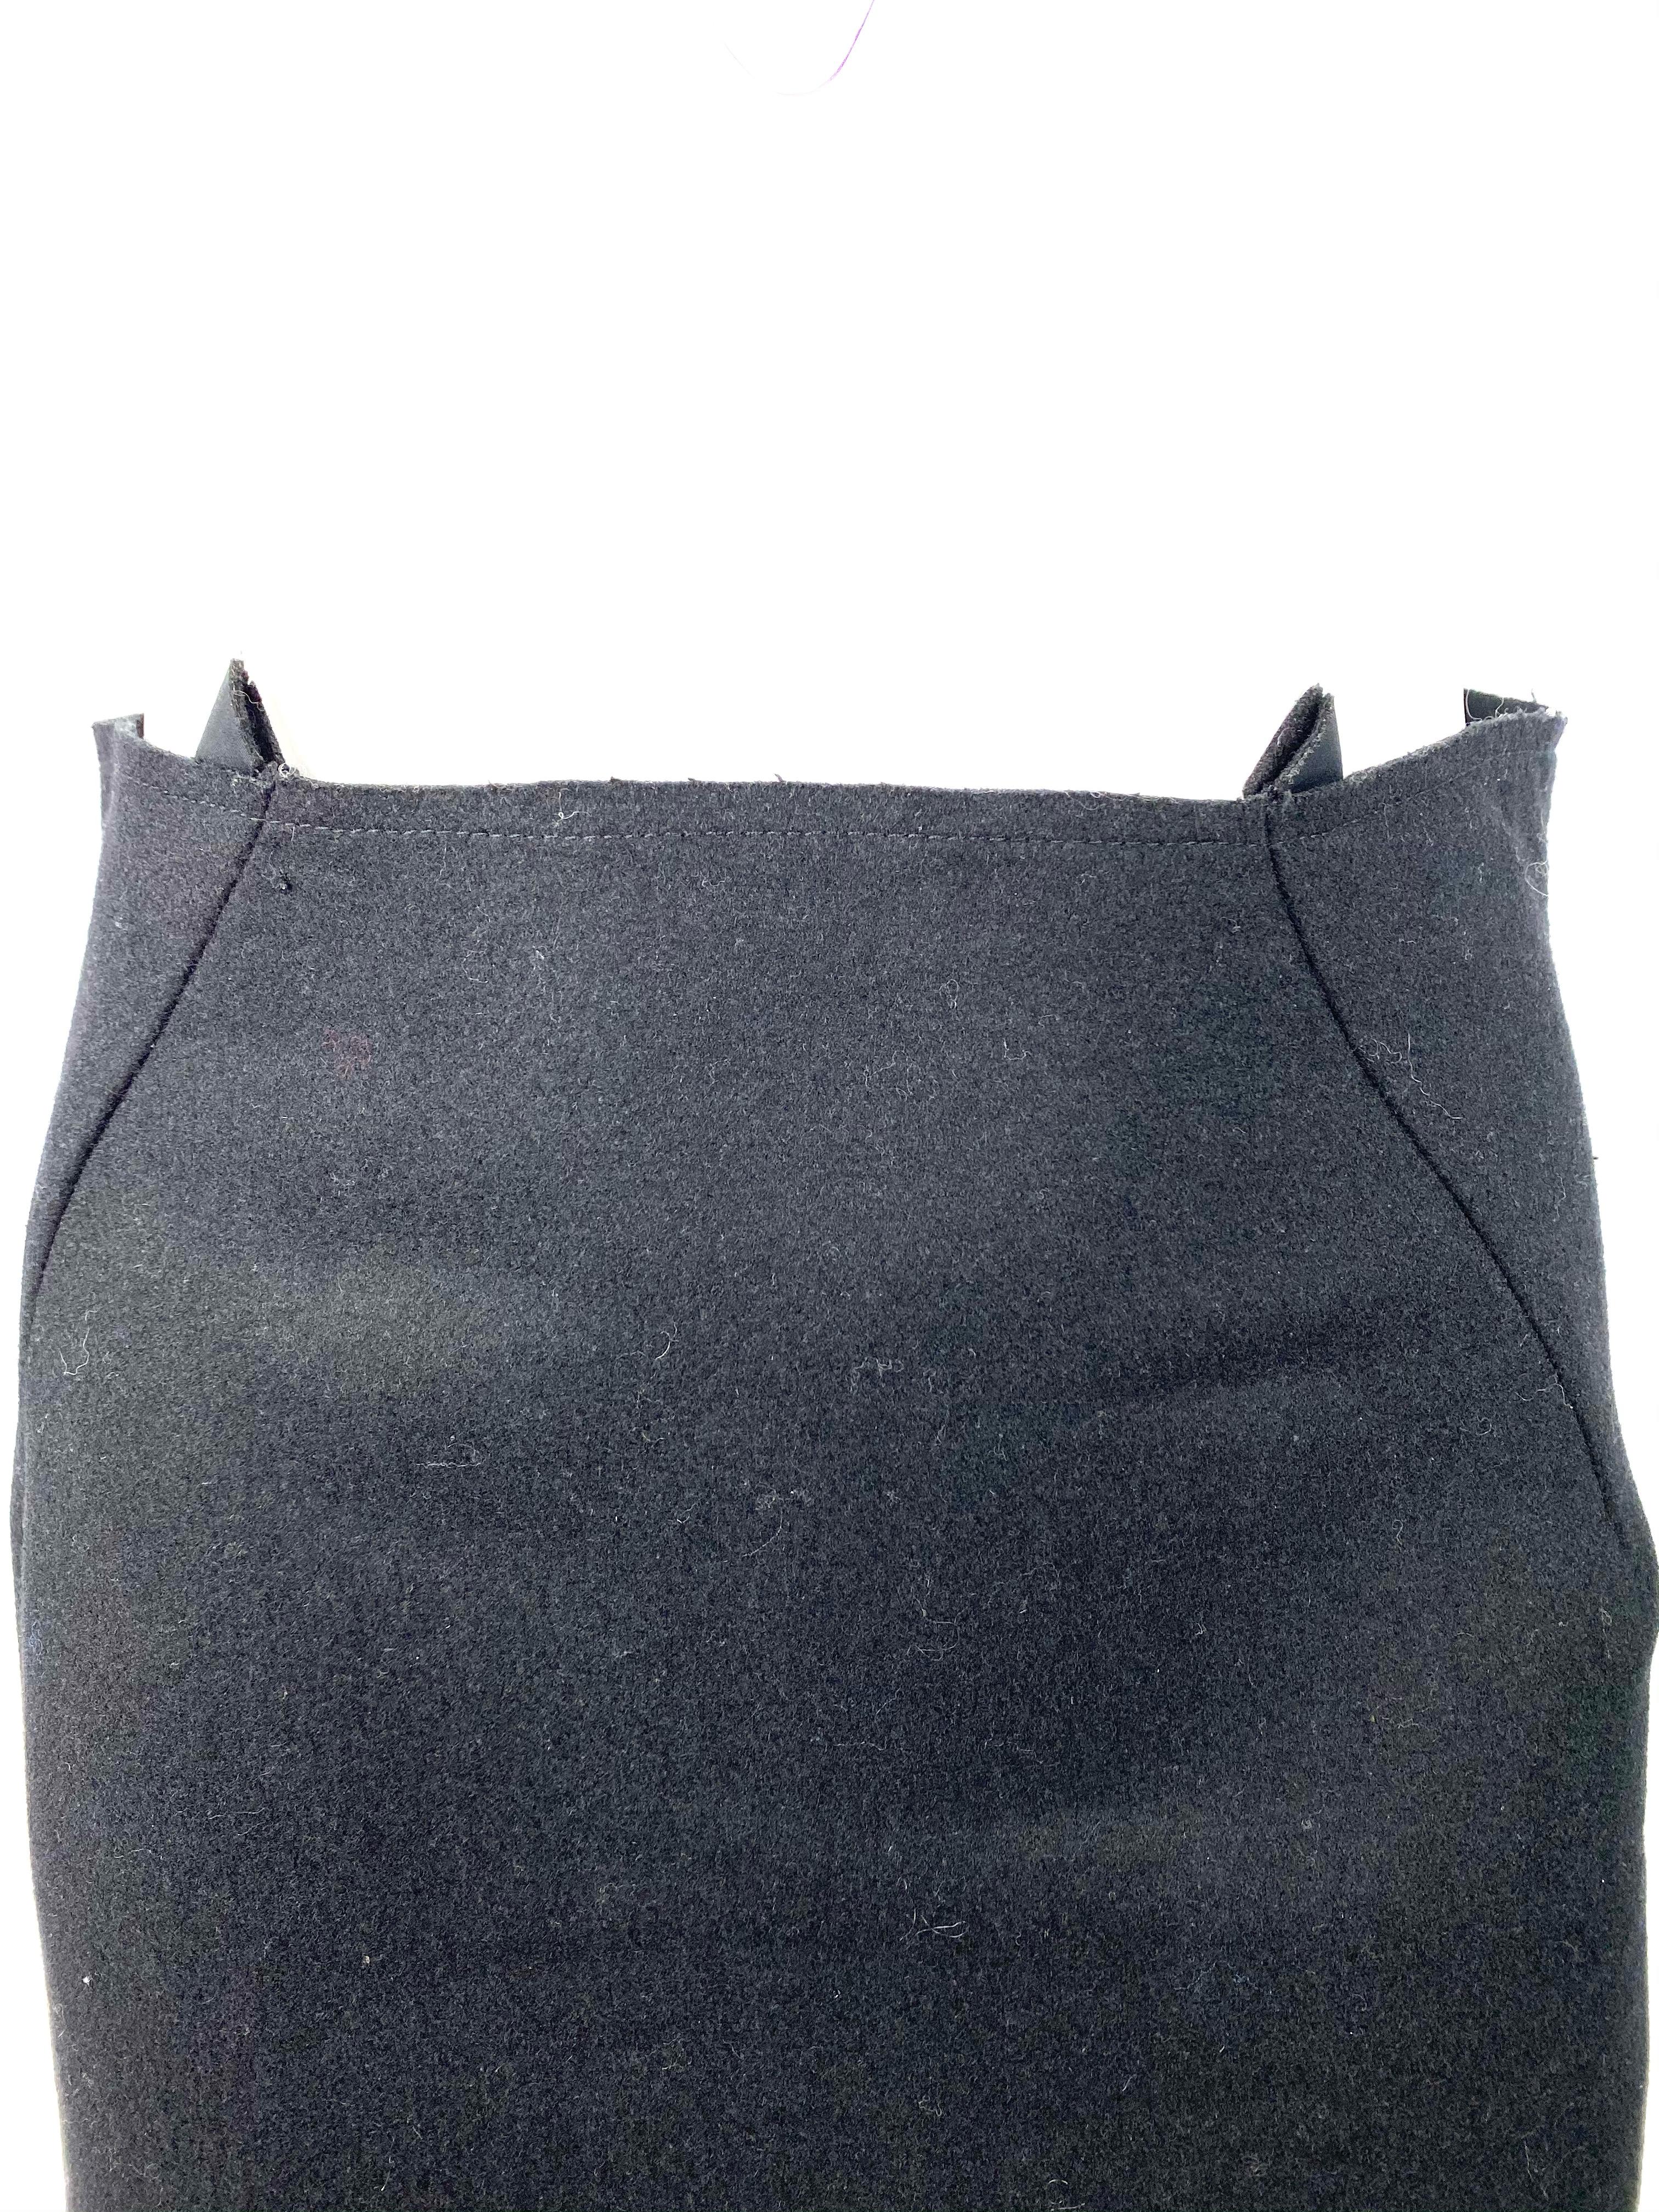 Product details:

Black wool skirt in medium size designed by Nancy Stella Soto in the United States. The skirt features pencil style with geometric square cut out design on the bottom and concealed rear zip closure, mid length.